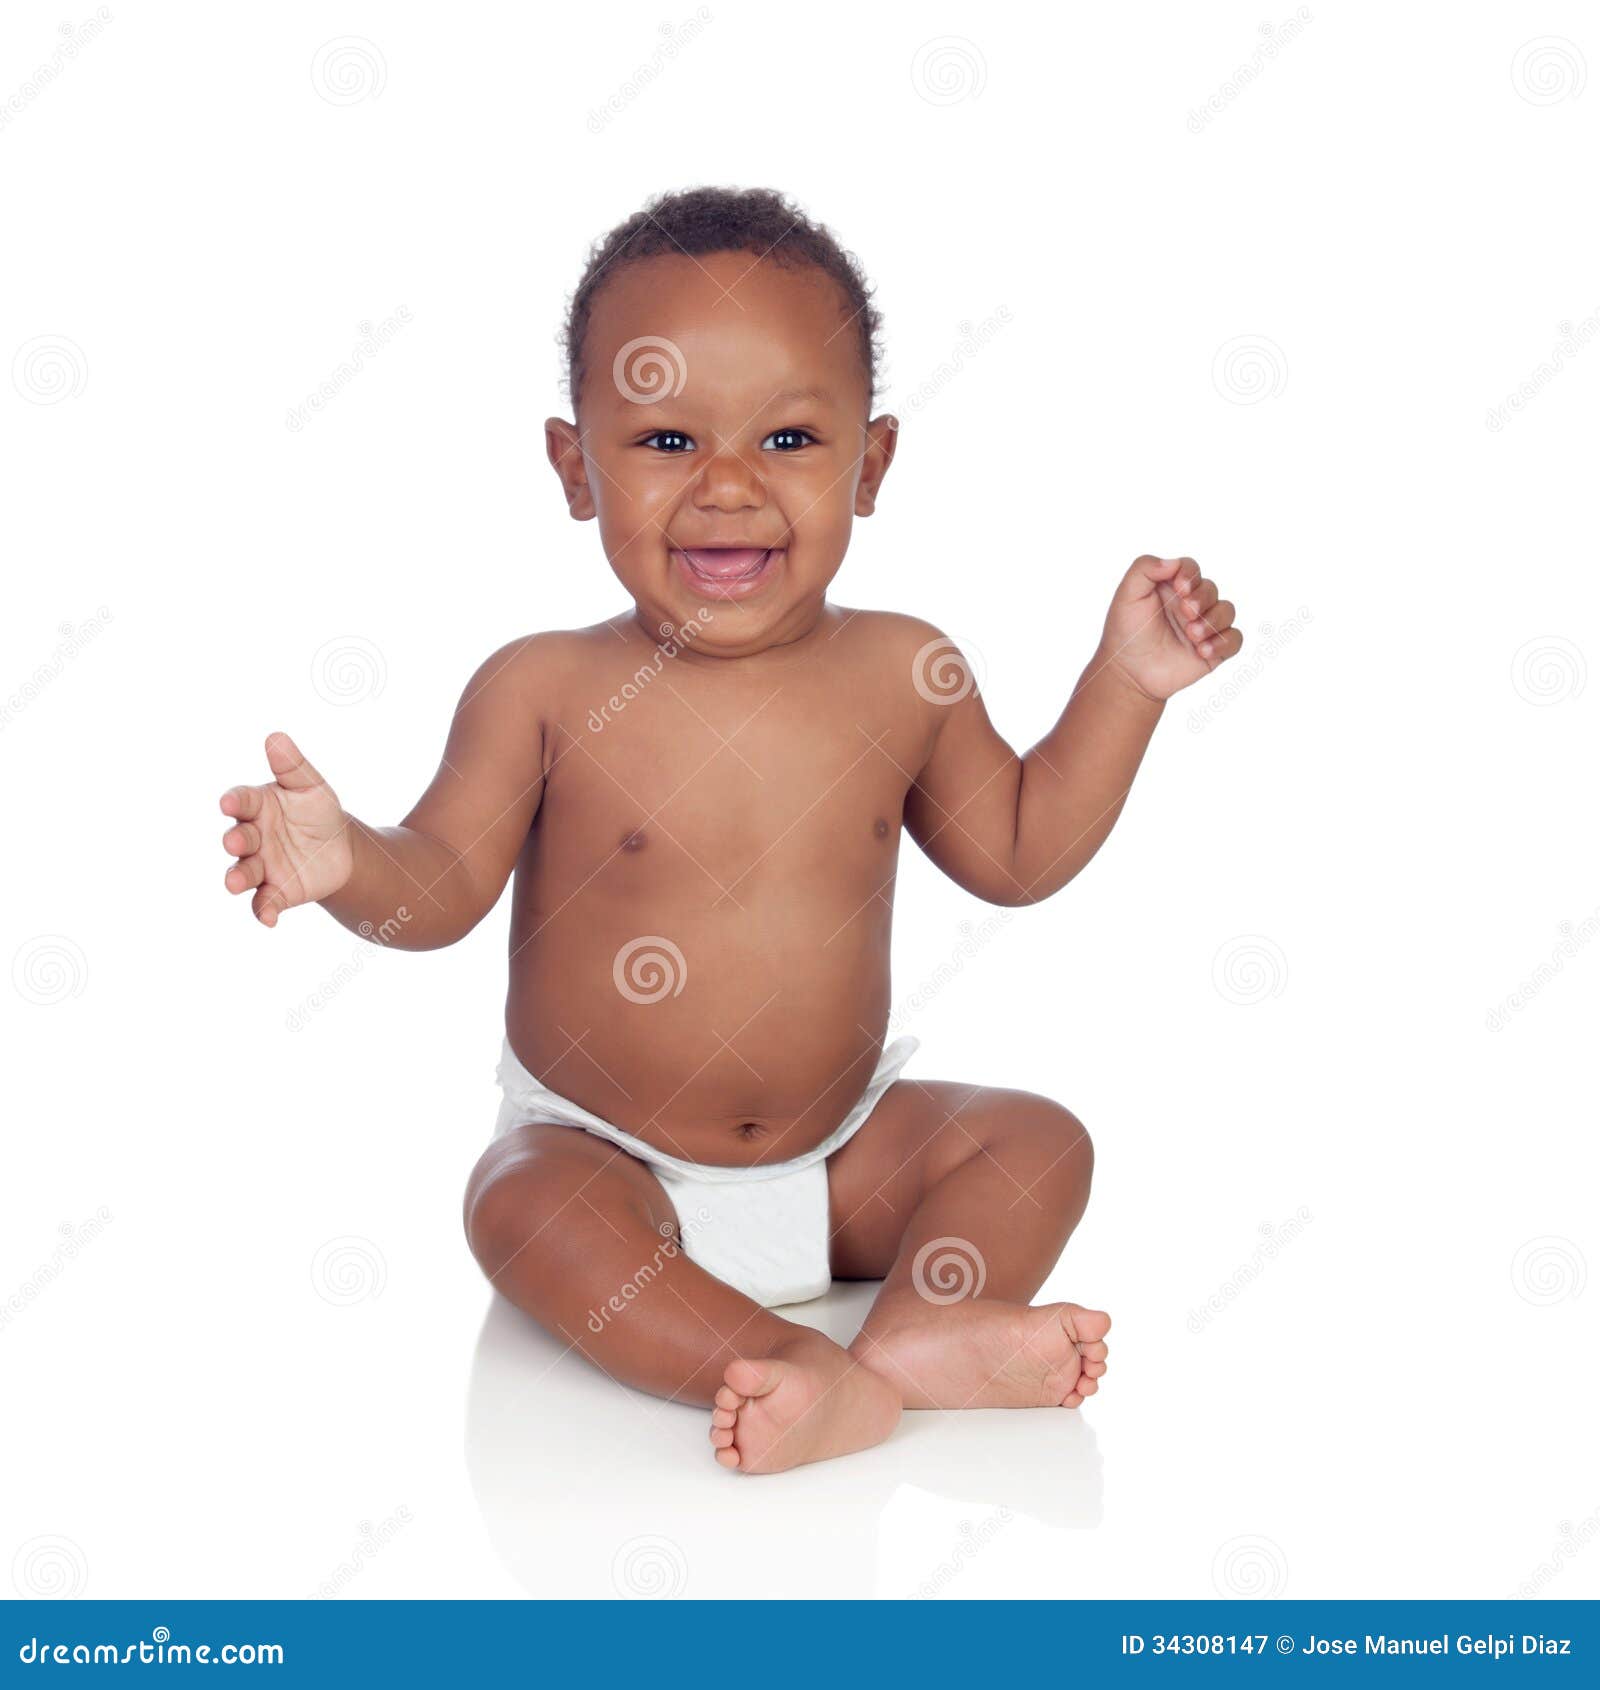 https://thumbs.dreamstime.com/z/adorable-african-baby-diaper-sitting-floor-isolated-white-background-34308147.jpg